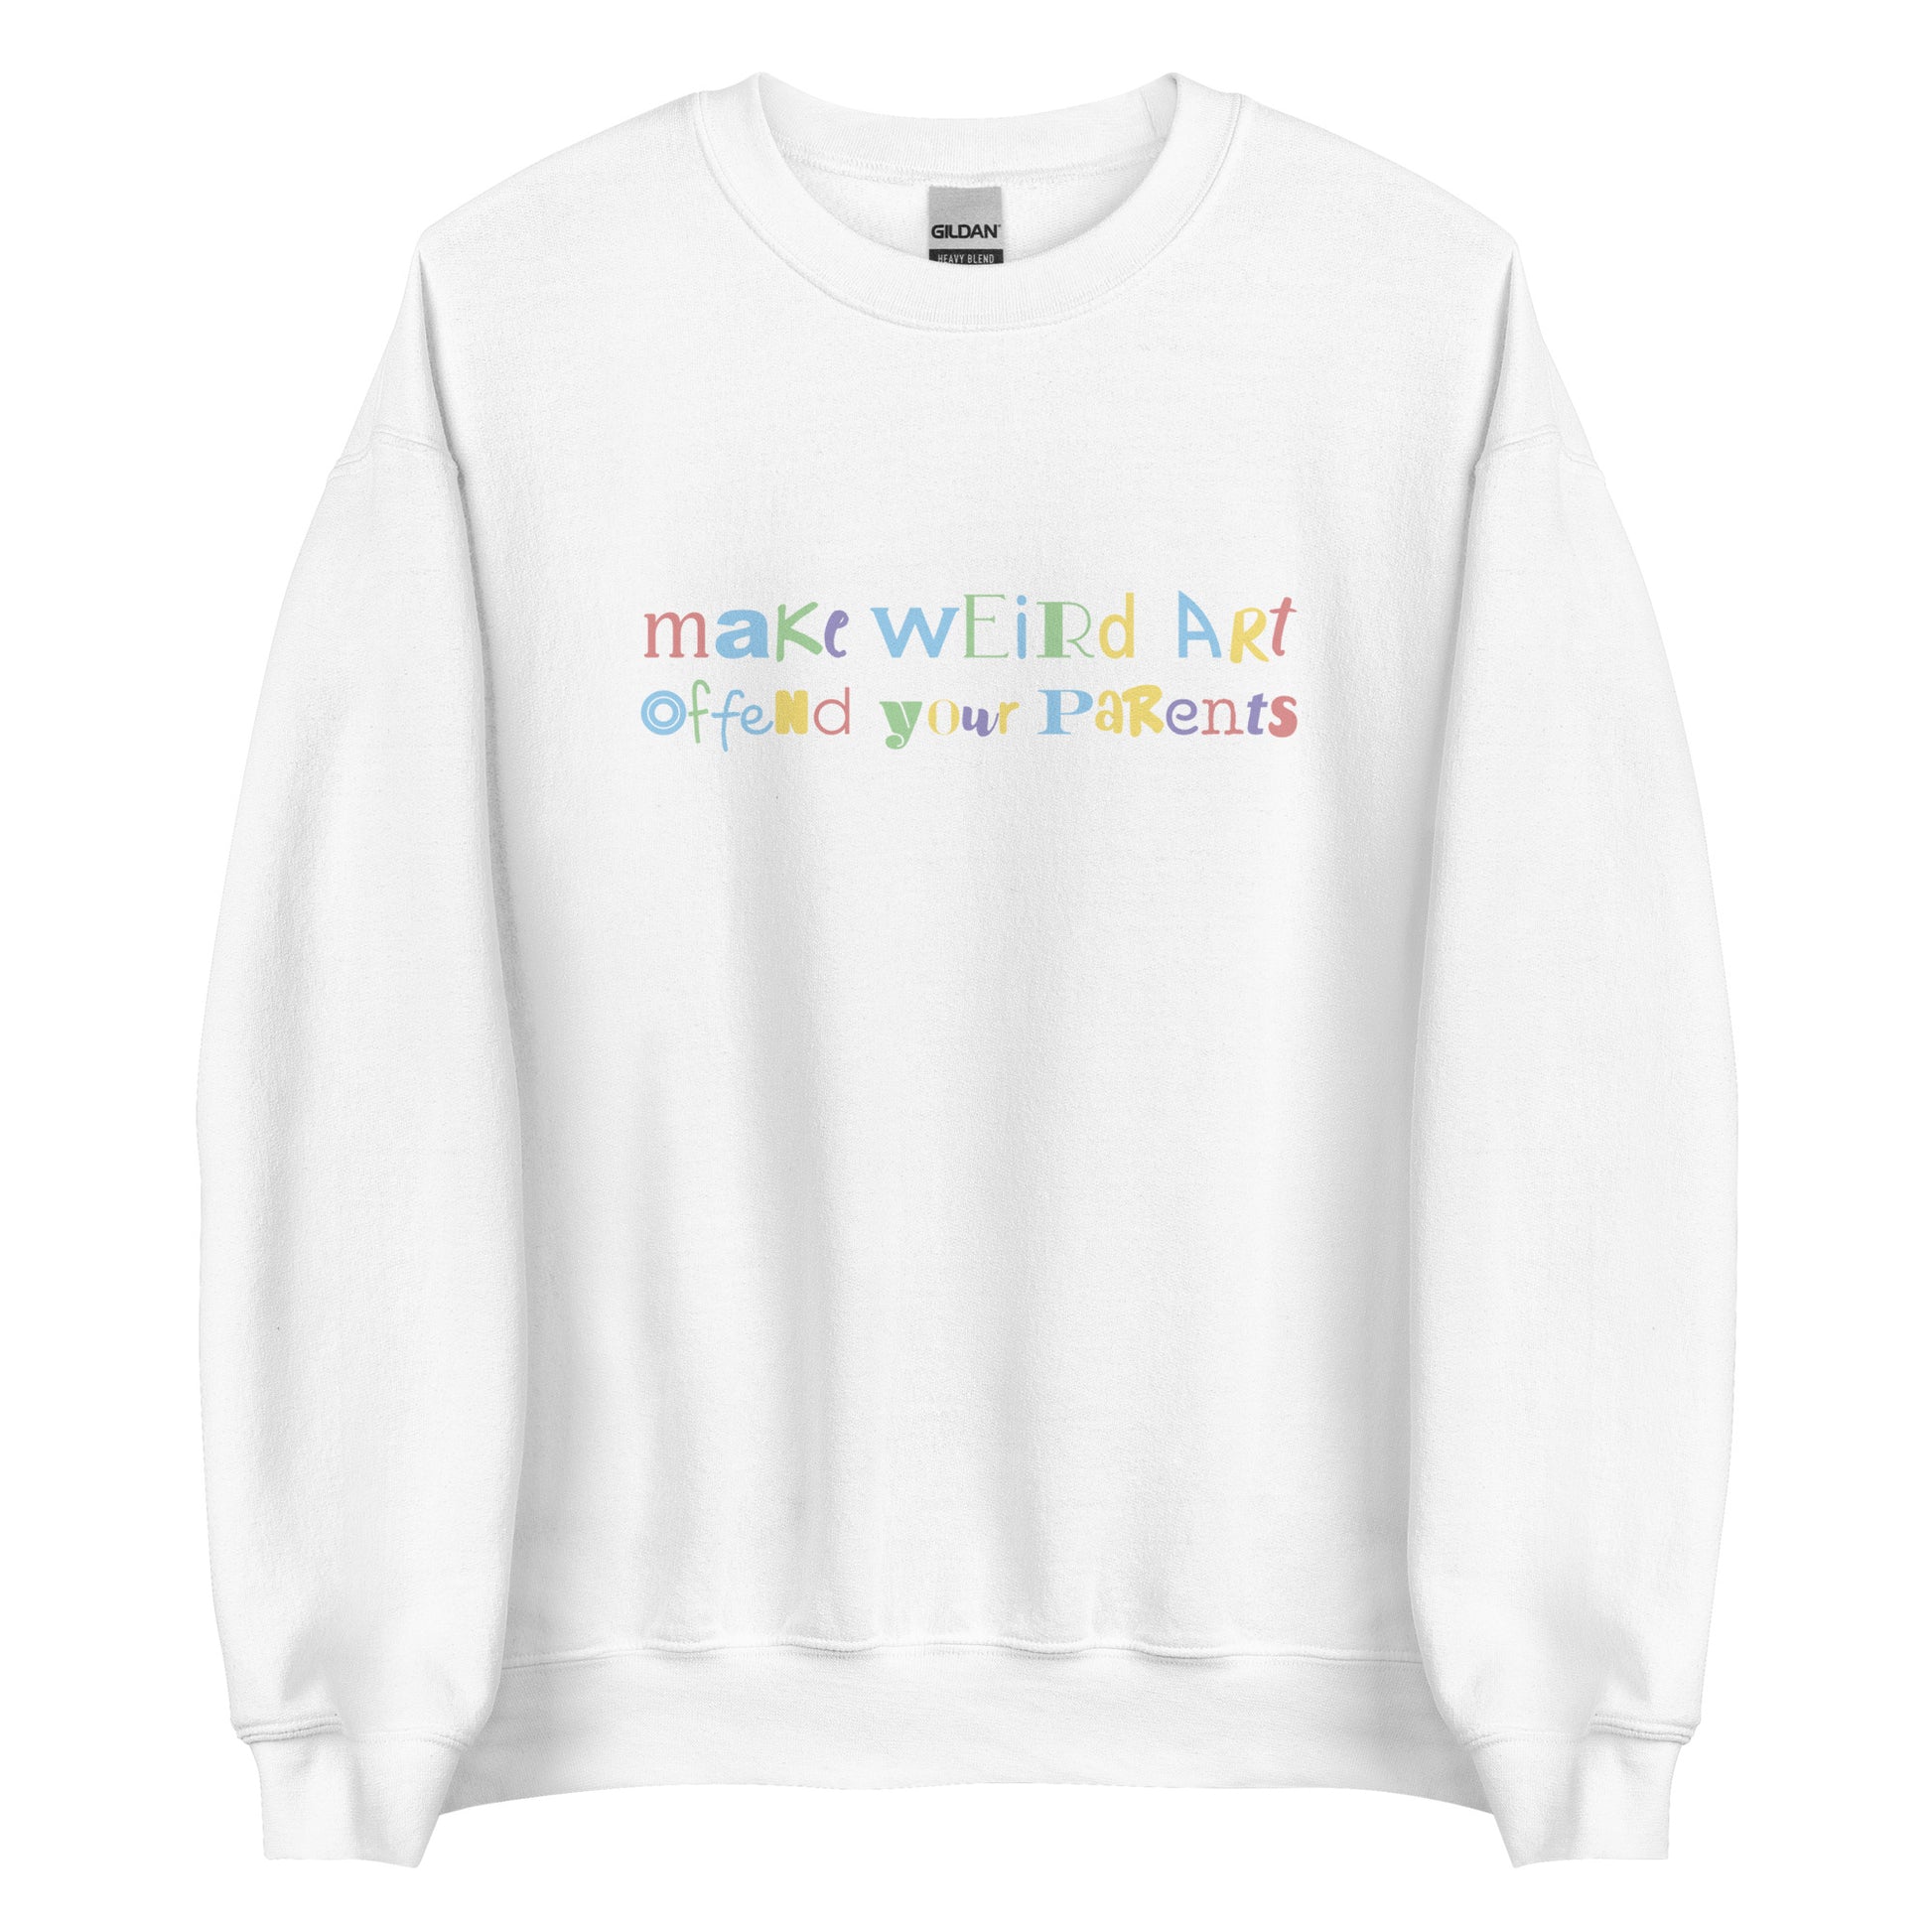 A white crewneck sweatshirt featuring text that reads "make weird art, offend your parents" in varying fonts and colors